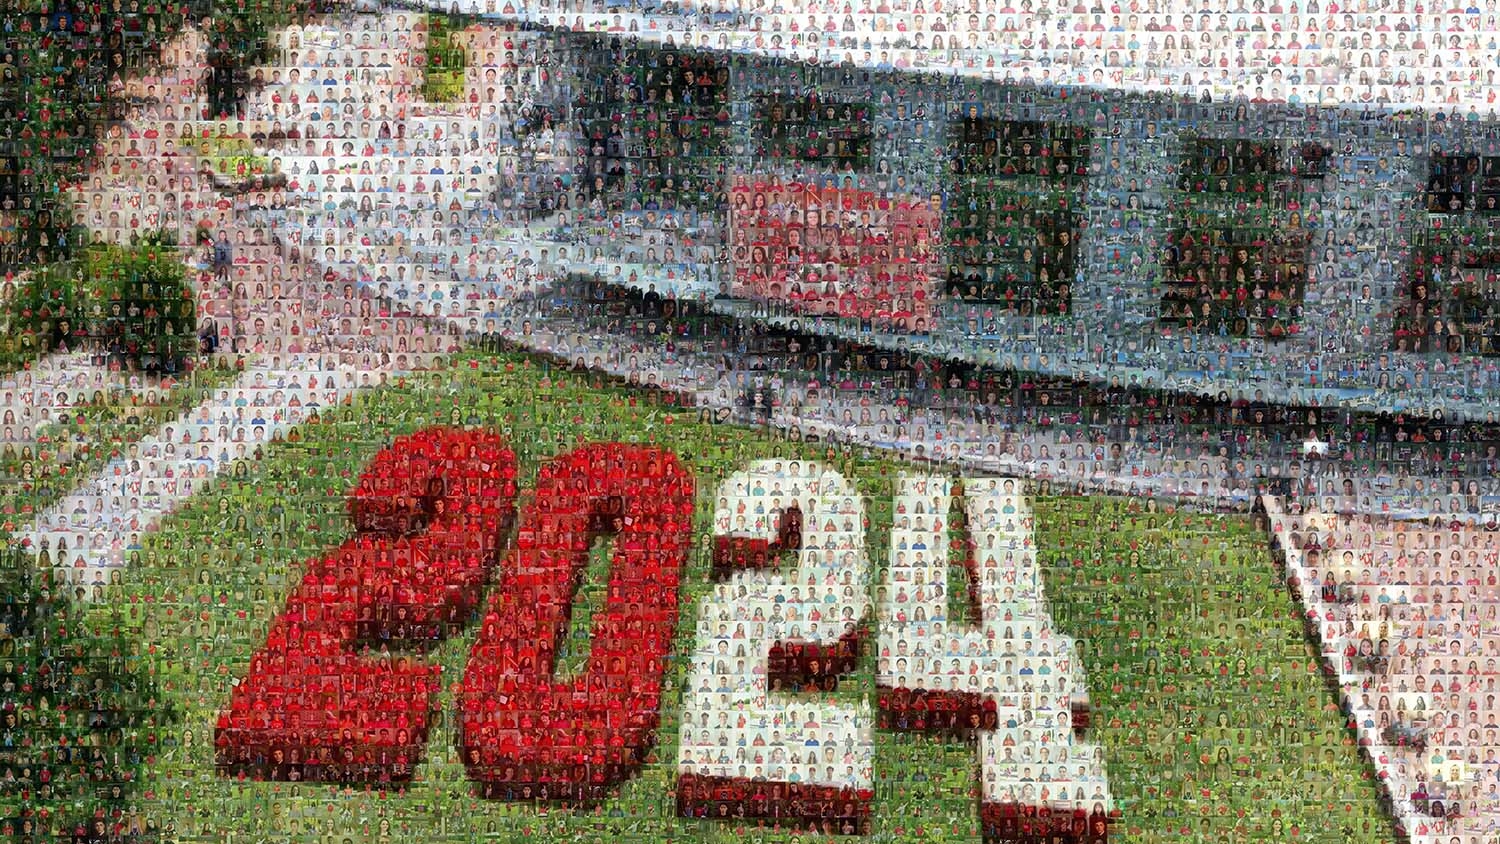 Photos of the members of the class of 2024 make a mosaic of the number 2024 on Stafford Commons in front of Talley Student Union